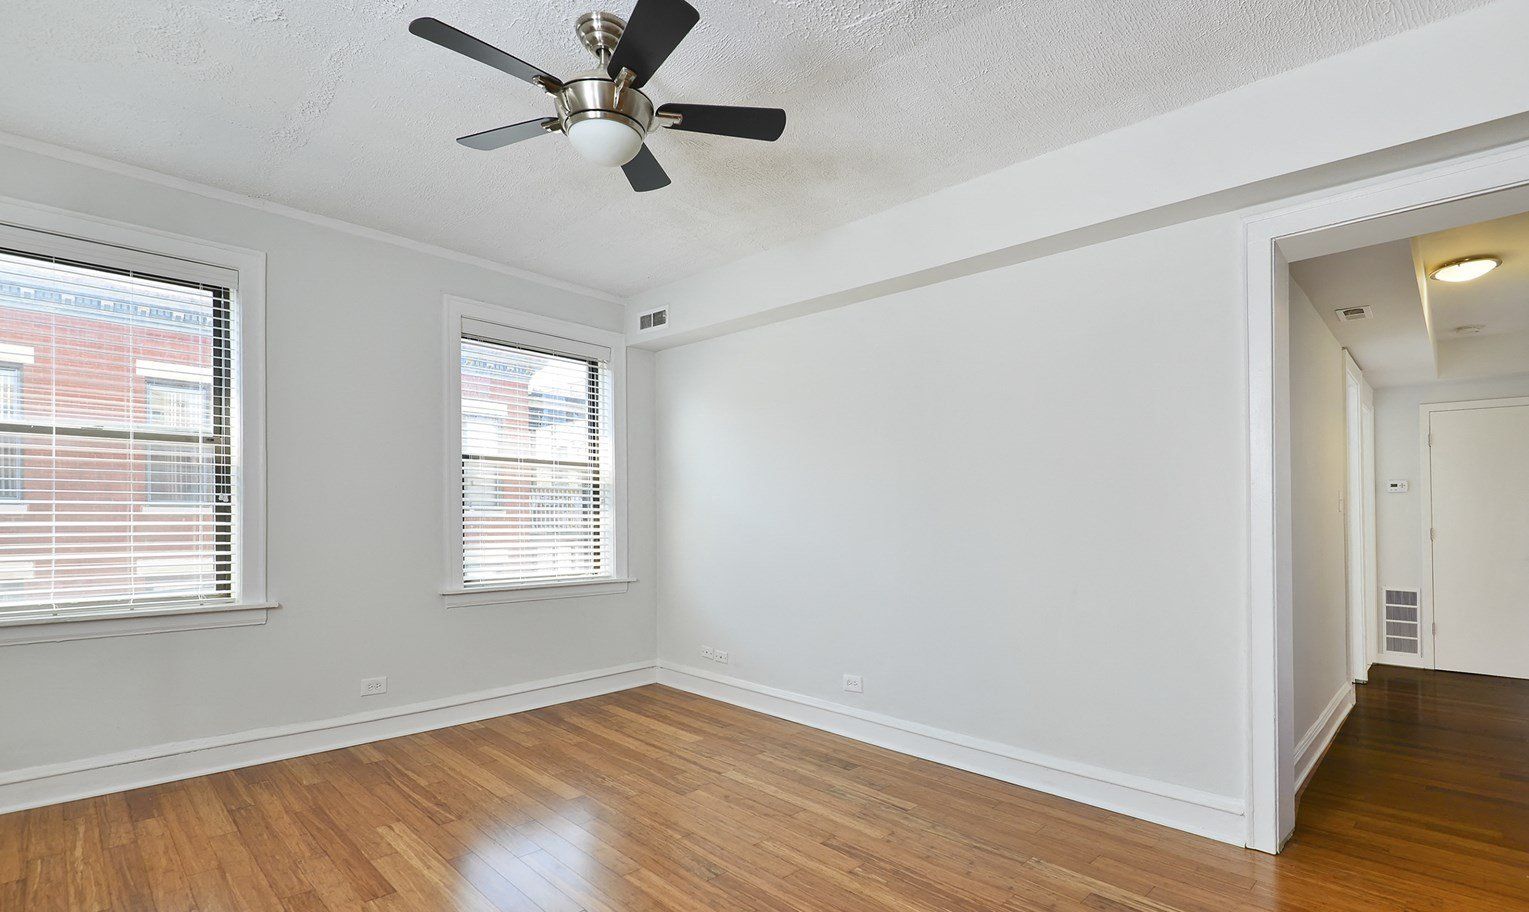 An empty room with hardwood floors and a ceiling fan at 1640 N Damen Apartments.